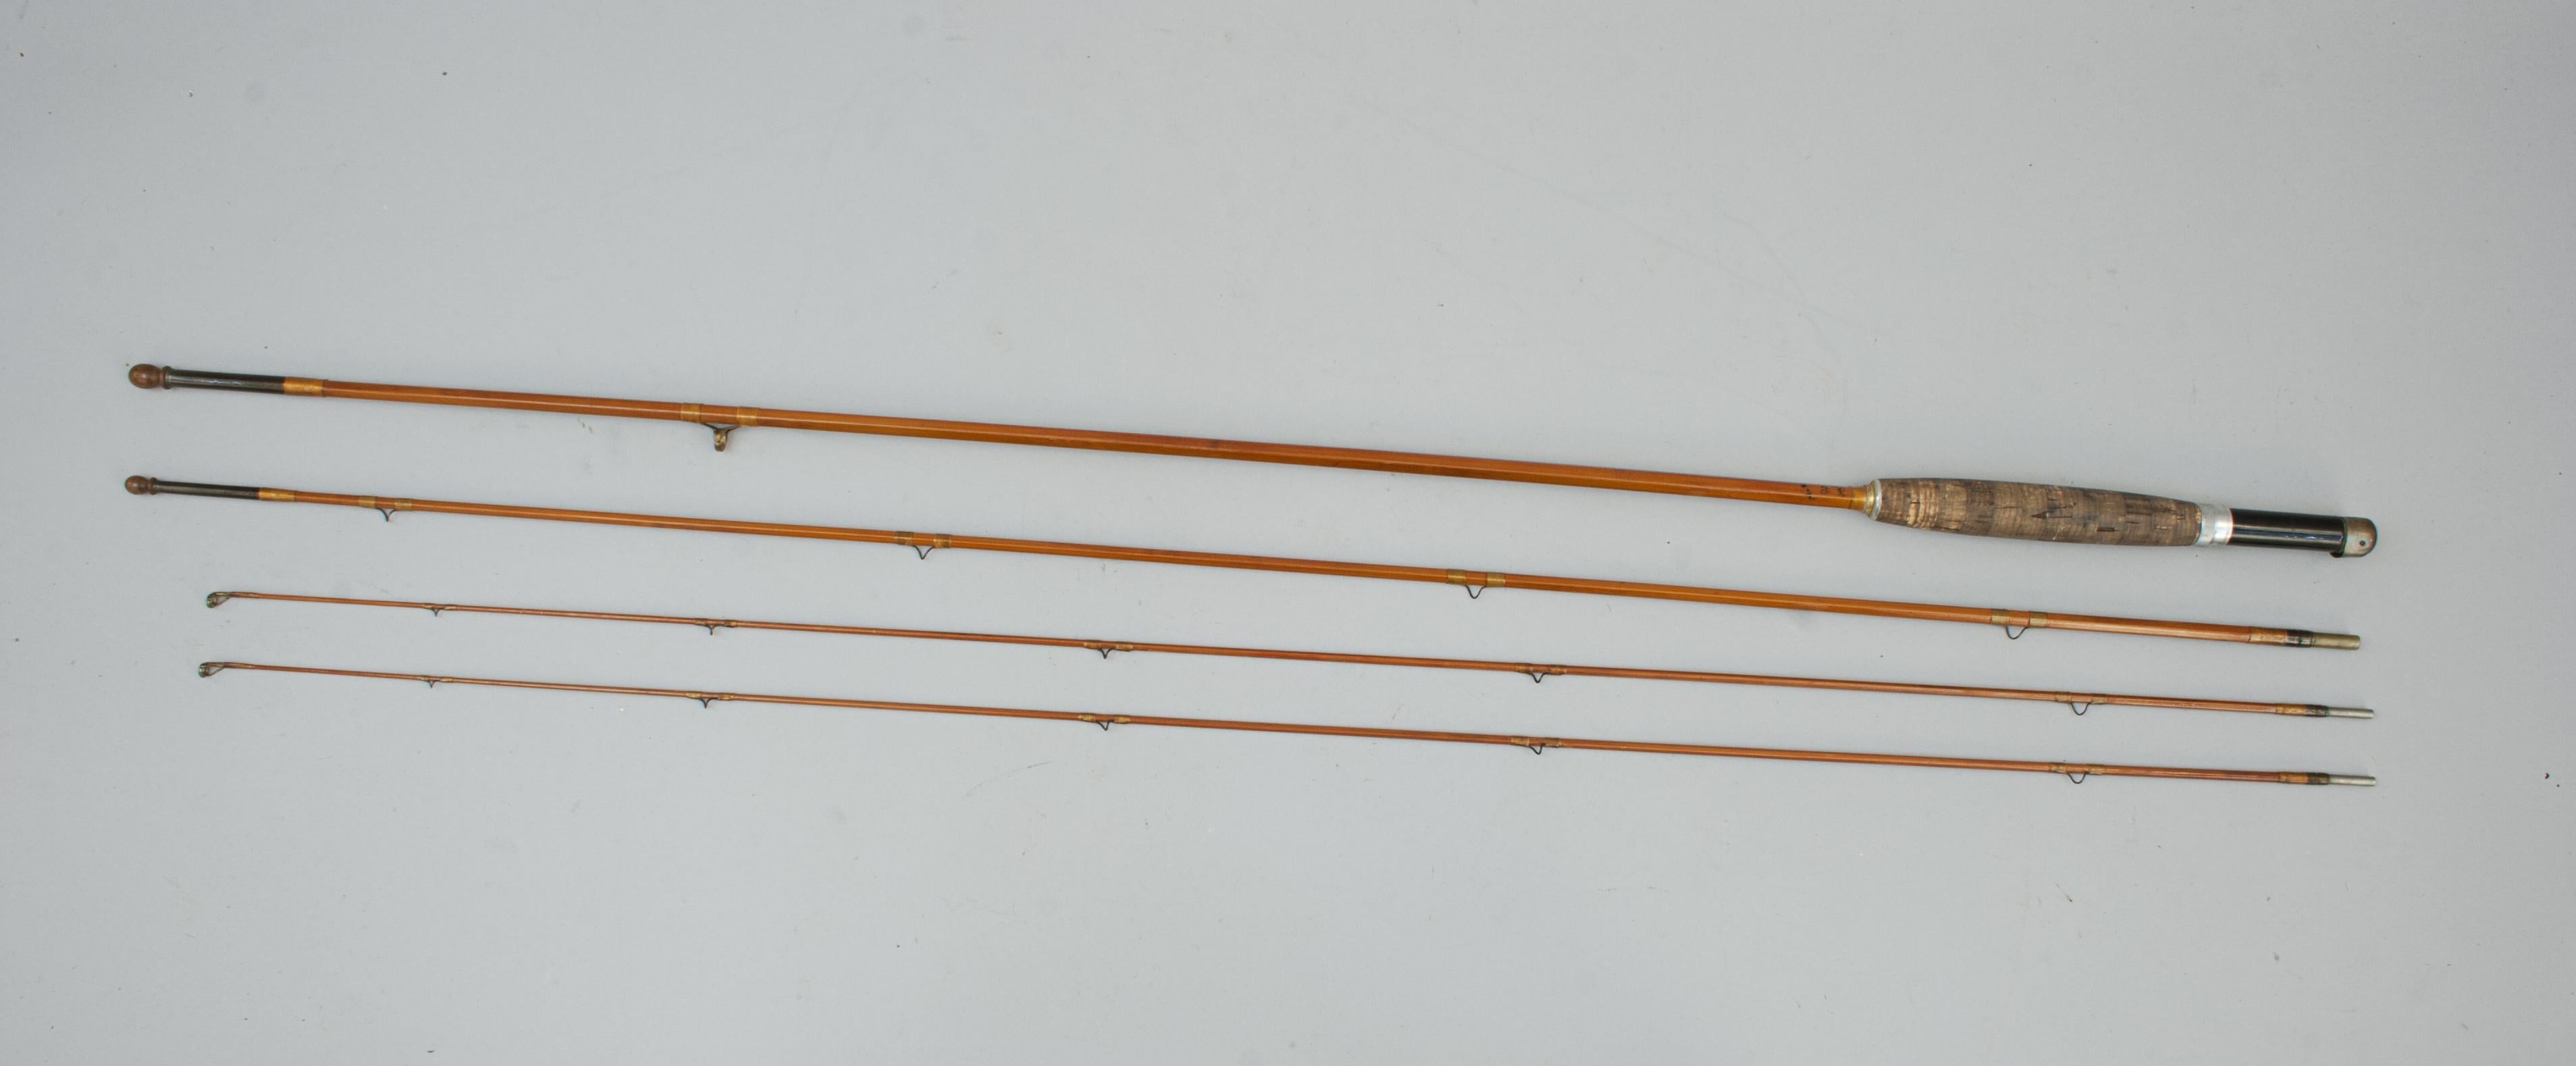 Vintage Hardy Split Cane 'Palakona' Fly Fishing Rod.
The Hardy 'Keith Rollo' rod is a split cane Palakona 3-piece trout fly rod with spare tip made by Hardy's of Alnwick. This rod is in very good, original condition, with suction joints and wooden